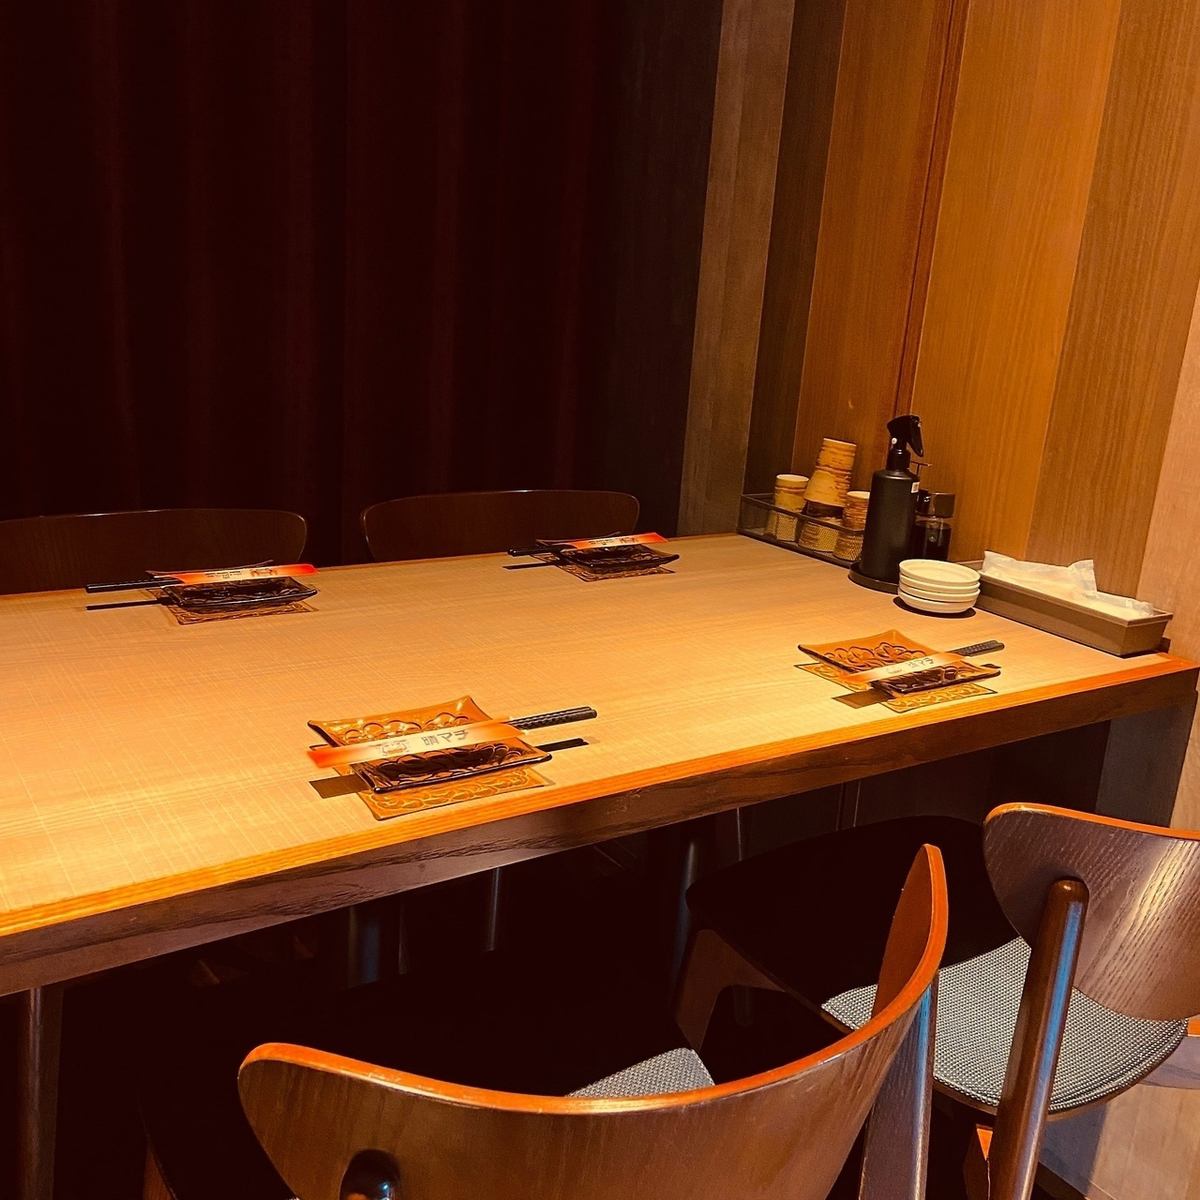 We have prepared a private room according to the number of people ◎ Please spend a relaxing time ♪